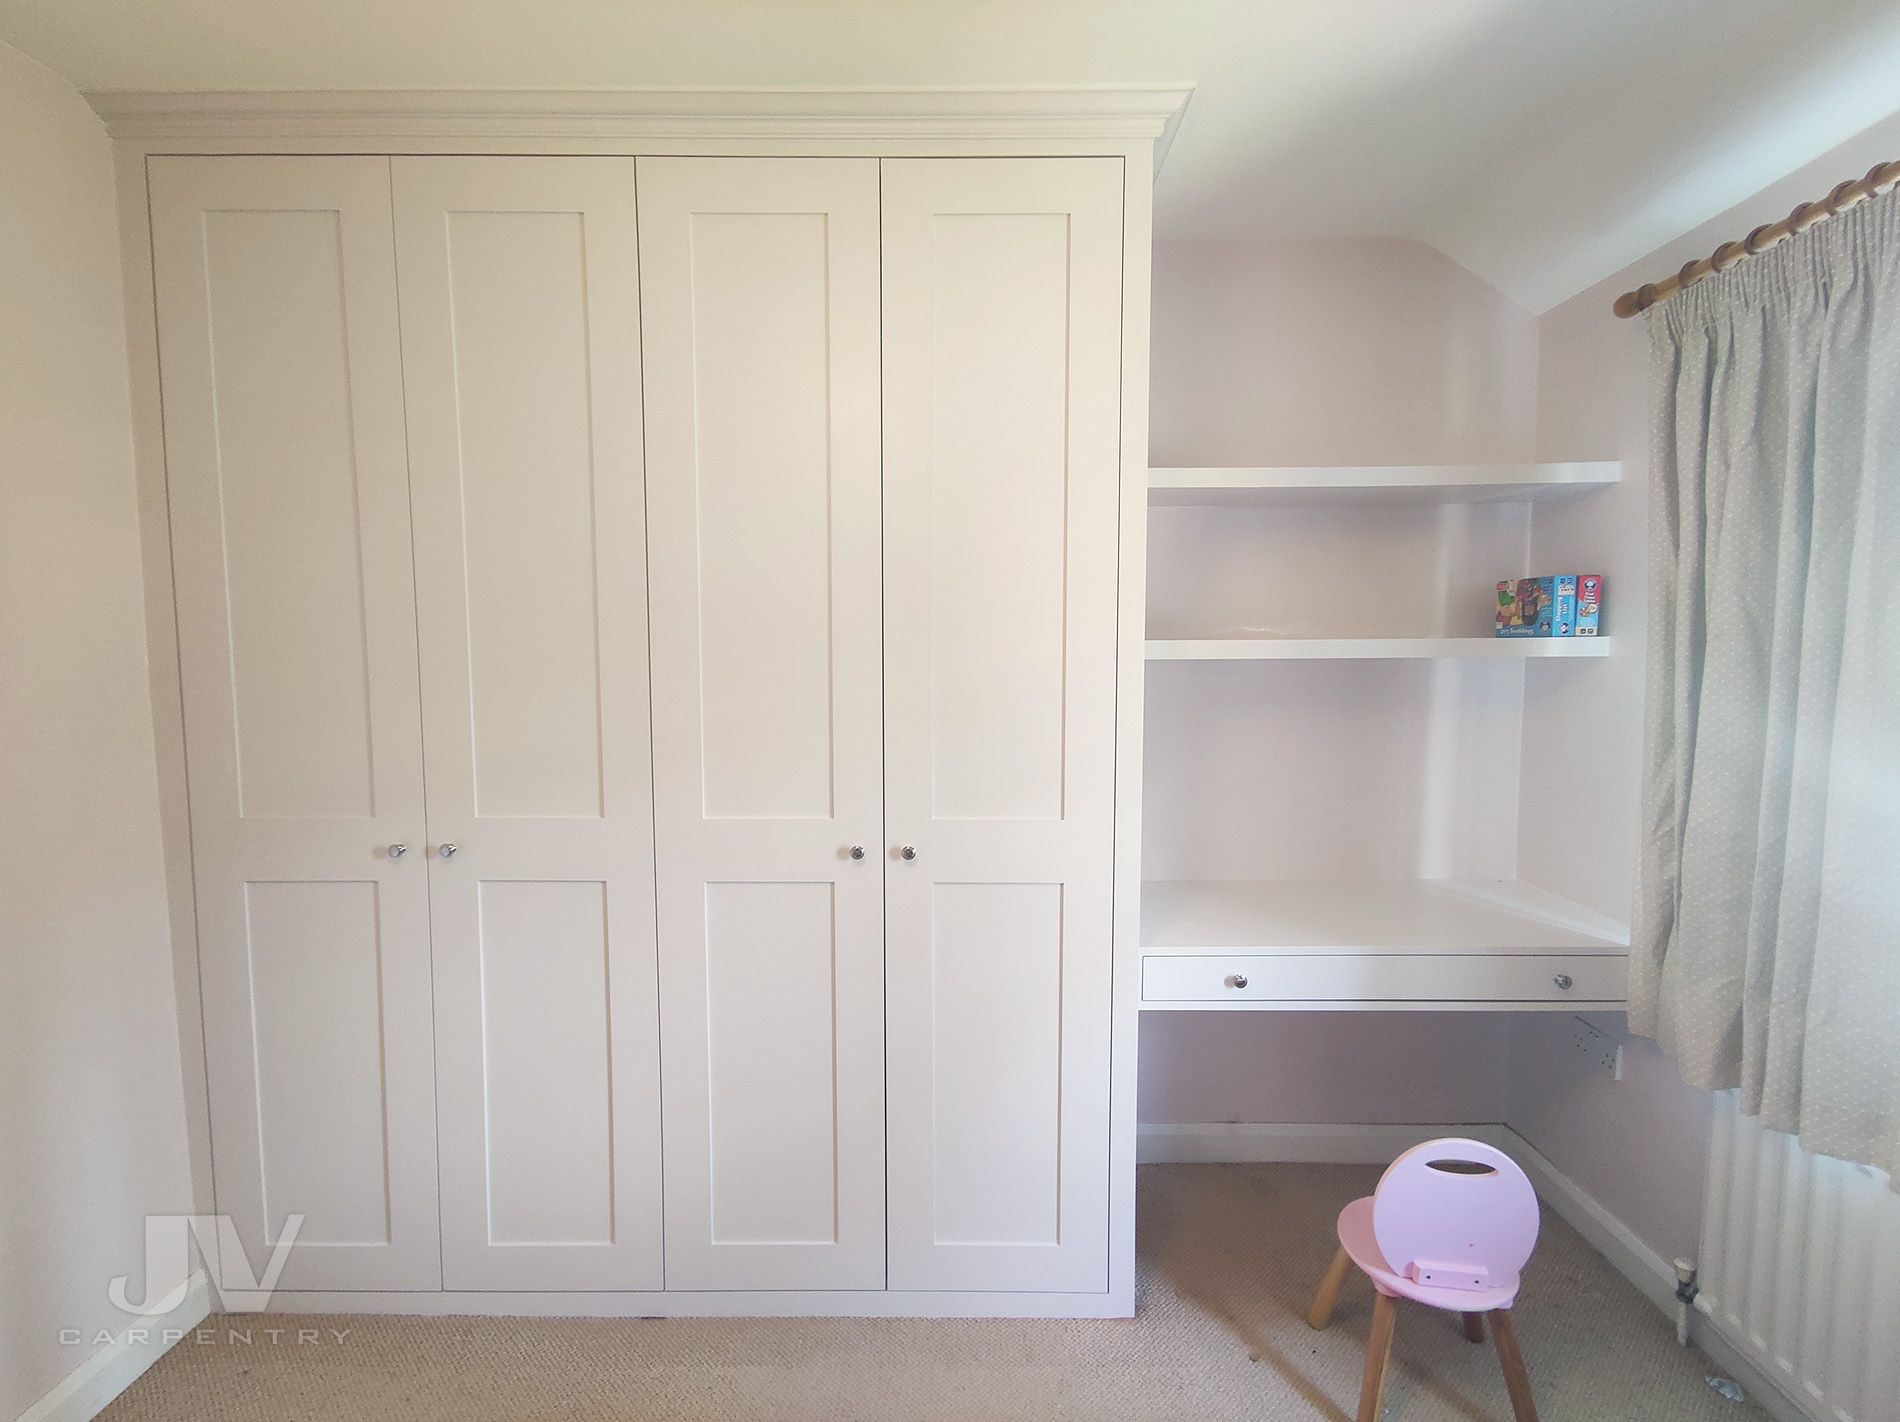 9 Fitted Wardrobes With Dressing Table Ideas | Jv Carpentry For Wardrobes And Dressing Tables (View 3 of 22)